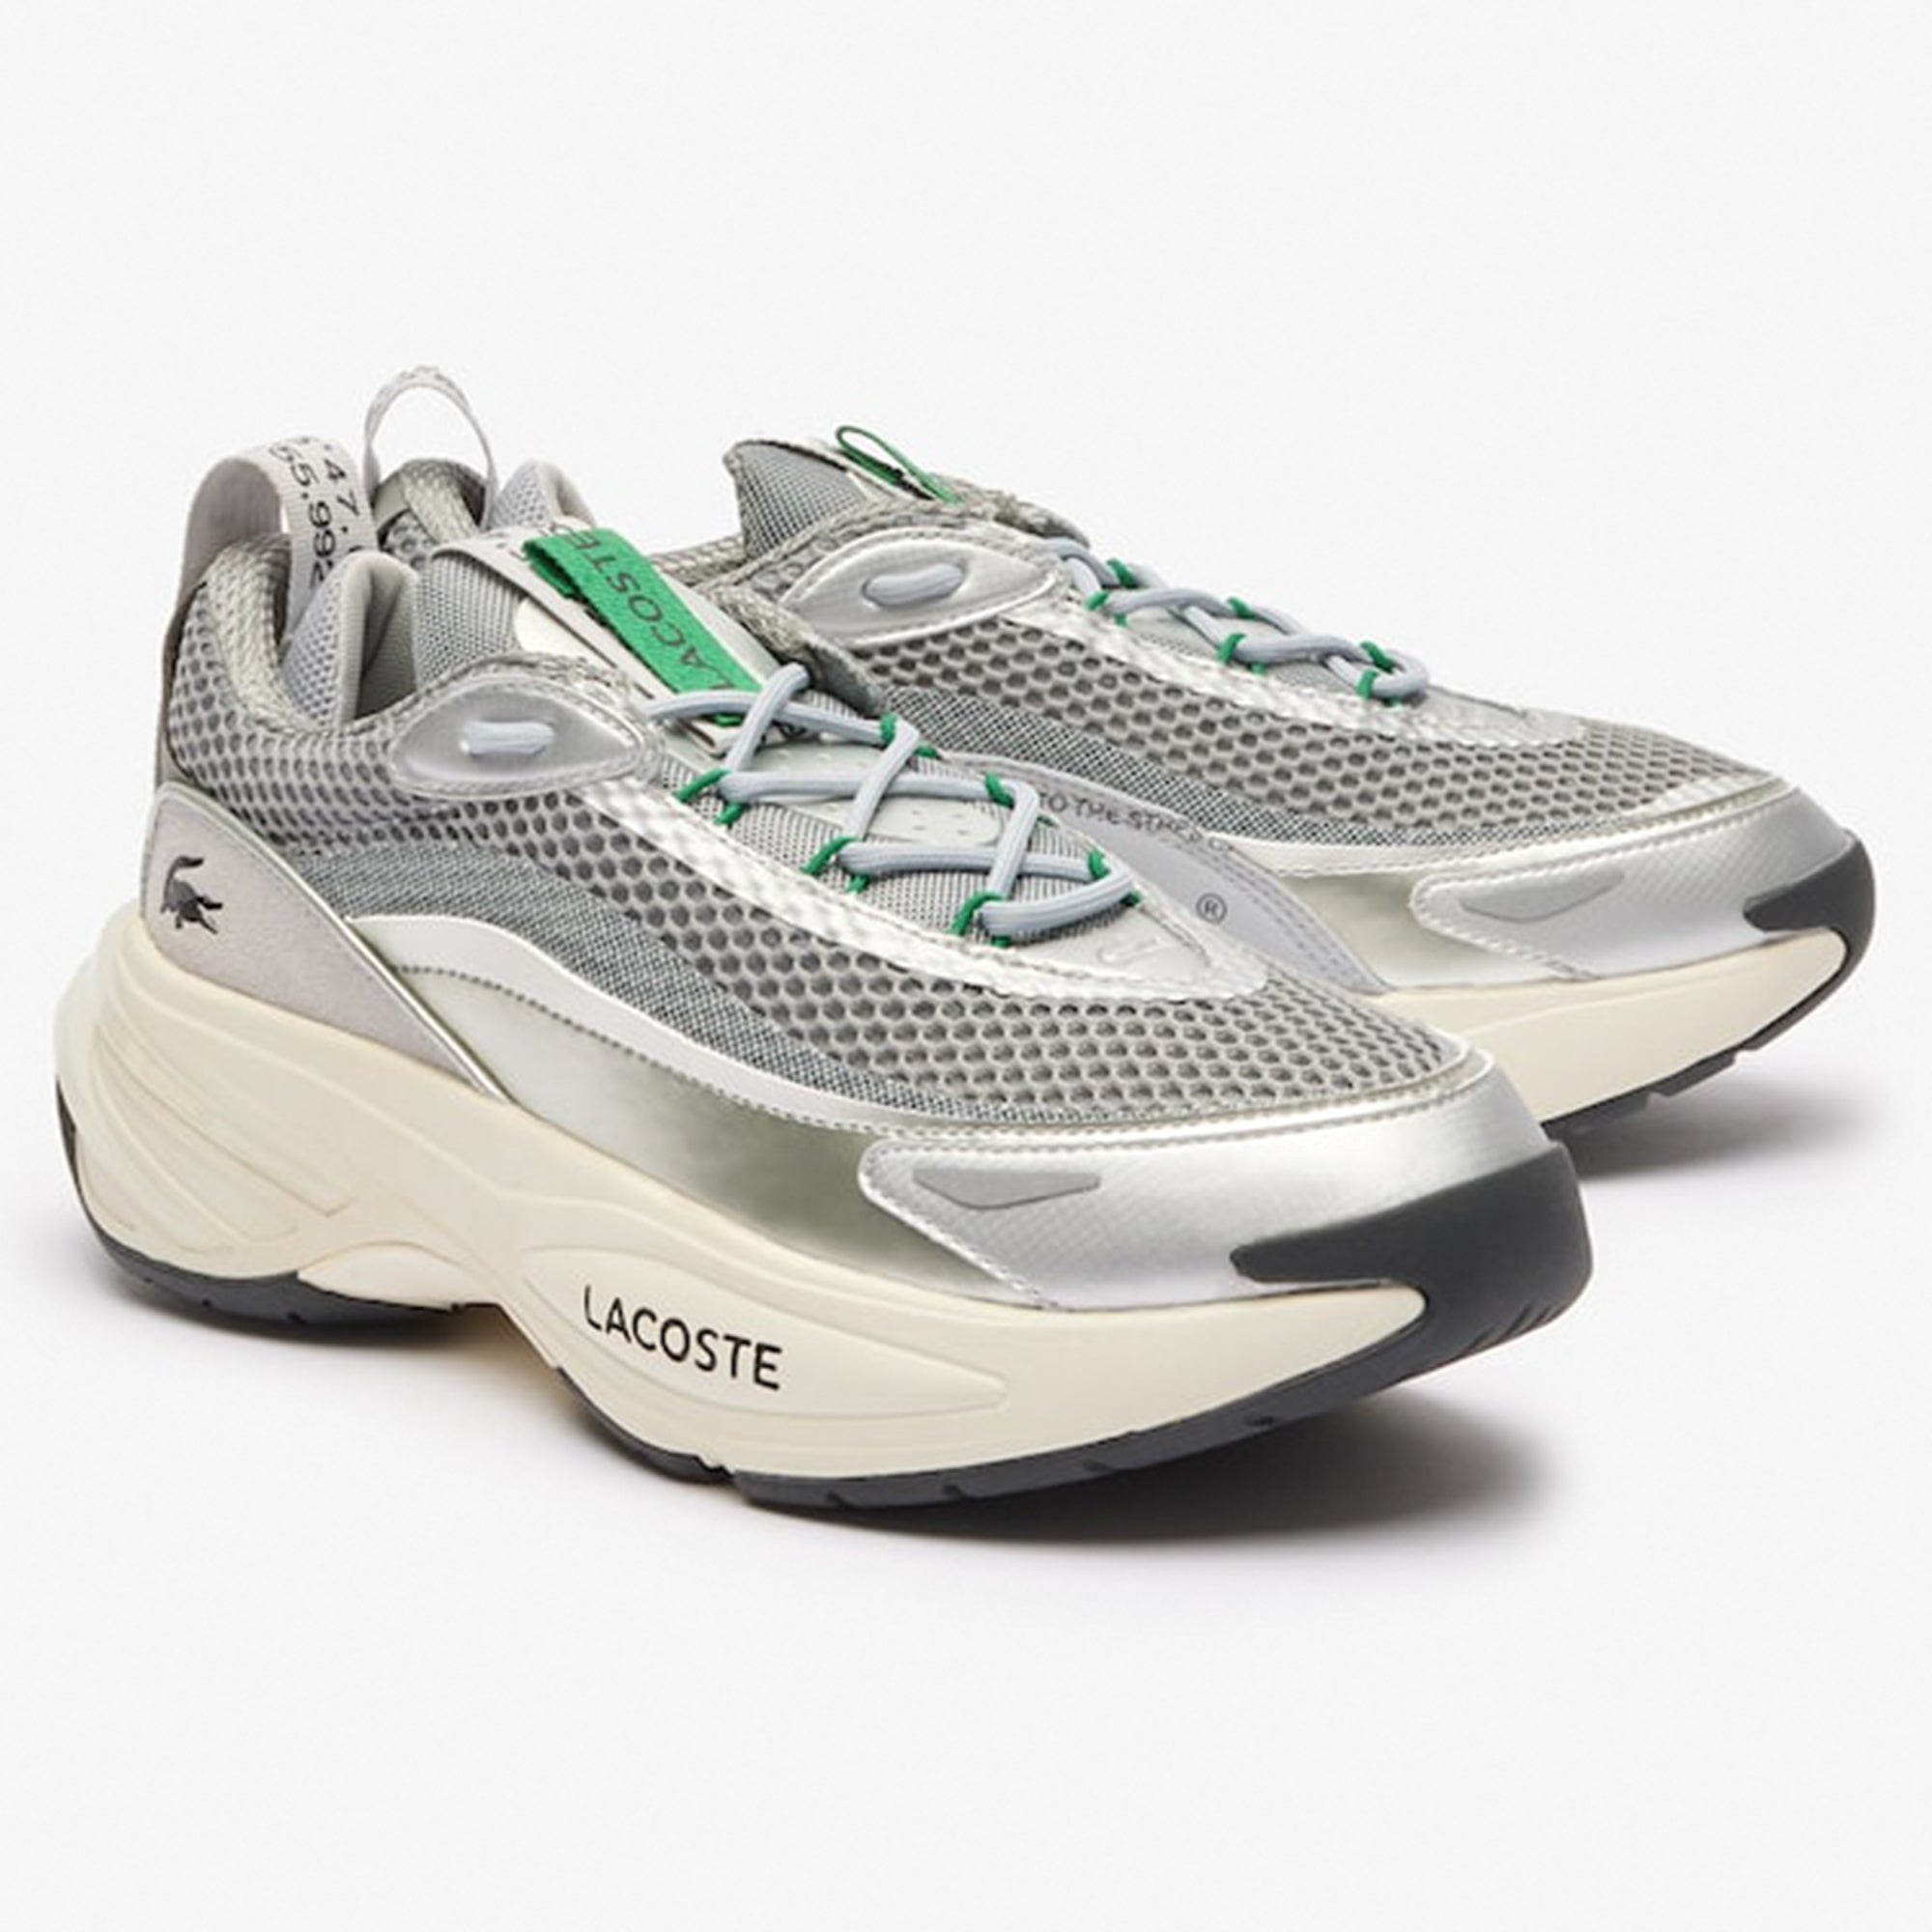 LACOSTE Men Audyssor Trainers Sneakers (Grey Silver)5